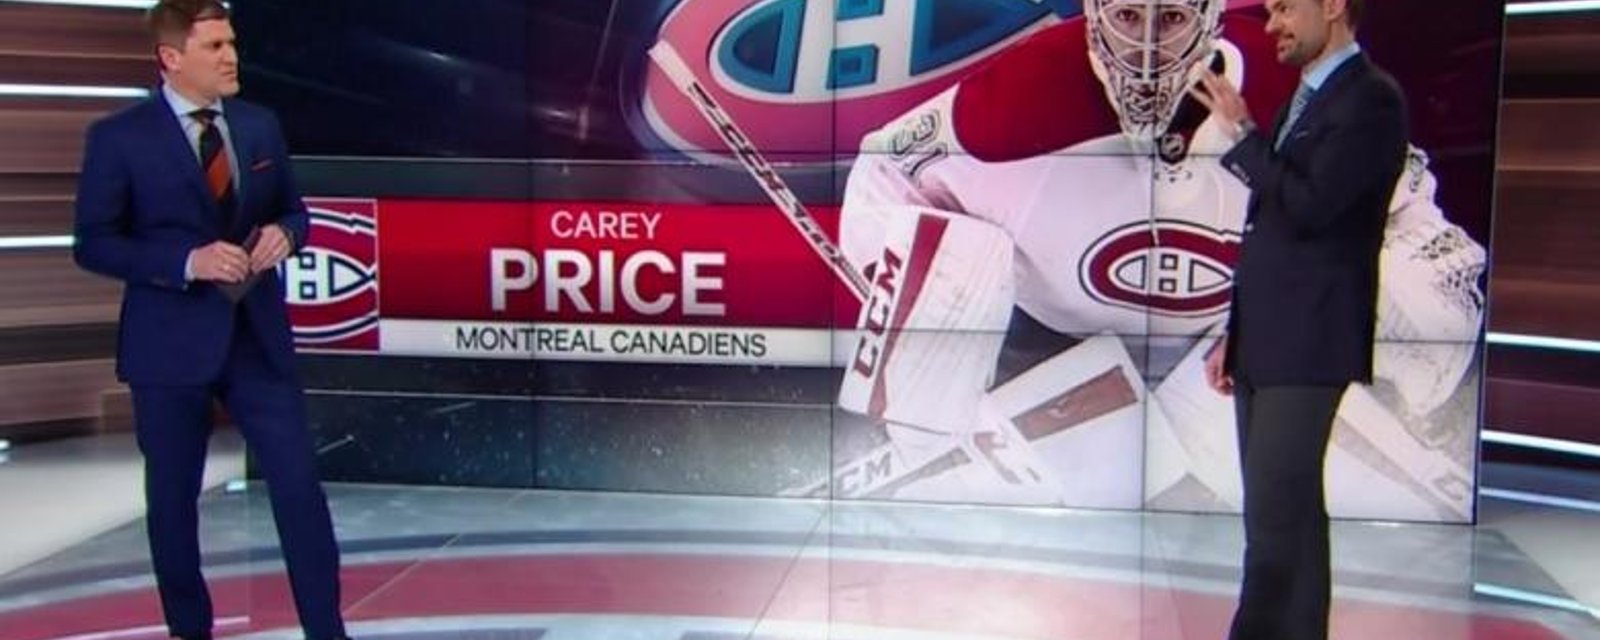 Blue Jays Chief physician breaks down the Carey Price injury.